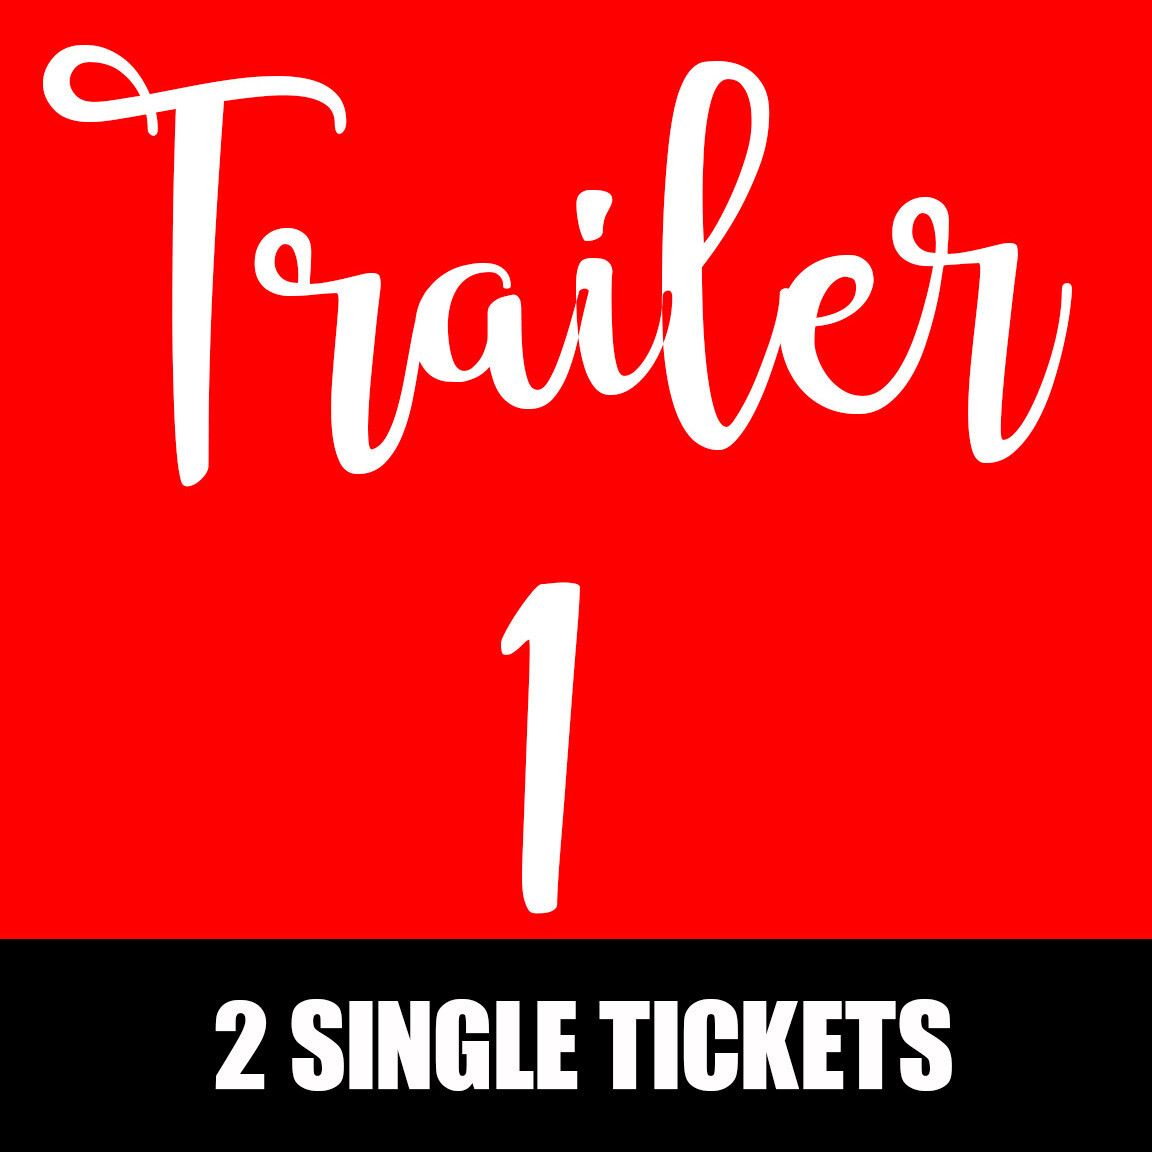 Trailer 1 - December 9th @ 10pm - Two Single Tickets